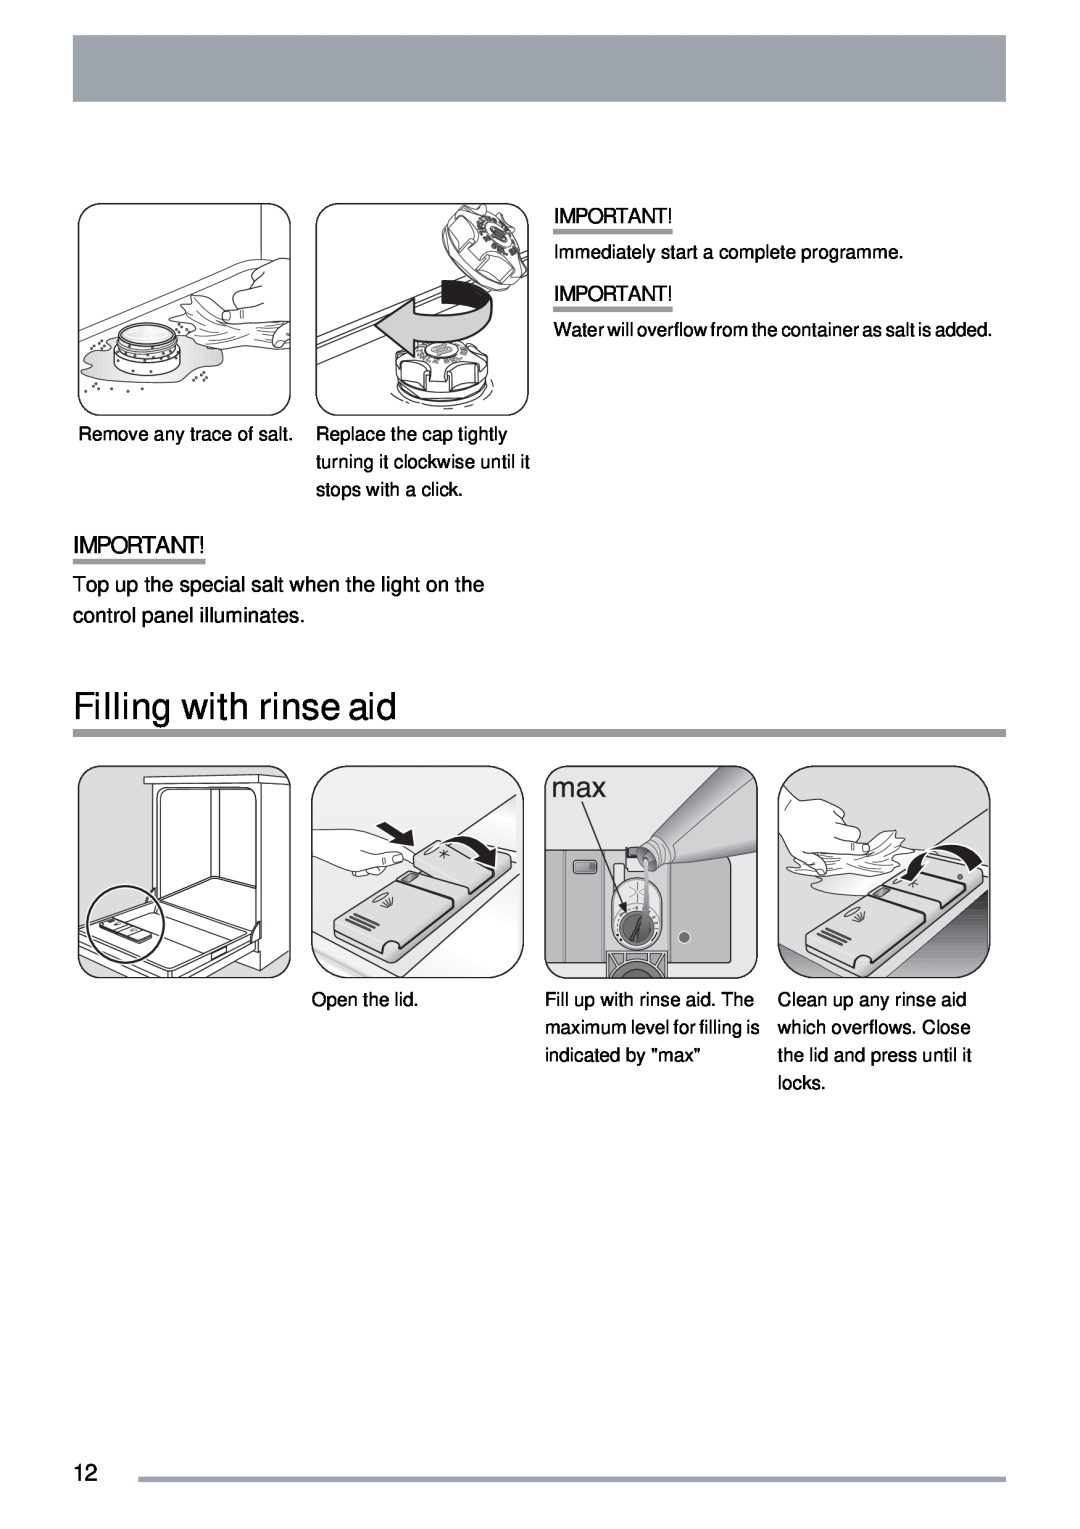 Zanussi ZDT 311 user manual Filling with rinse aid, Immediately start a complete programme, Open the lid, indicated by max 